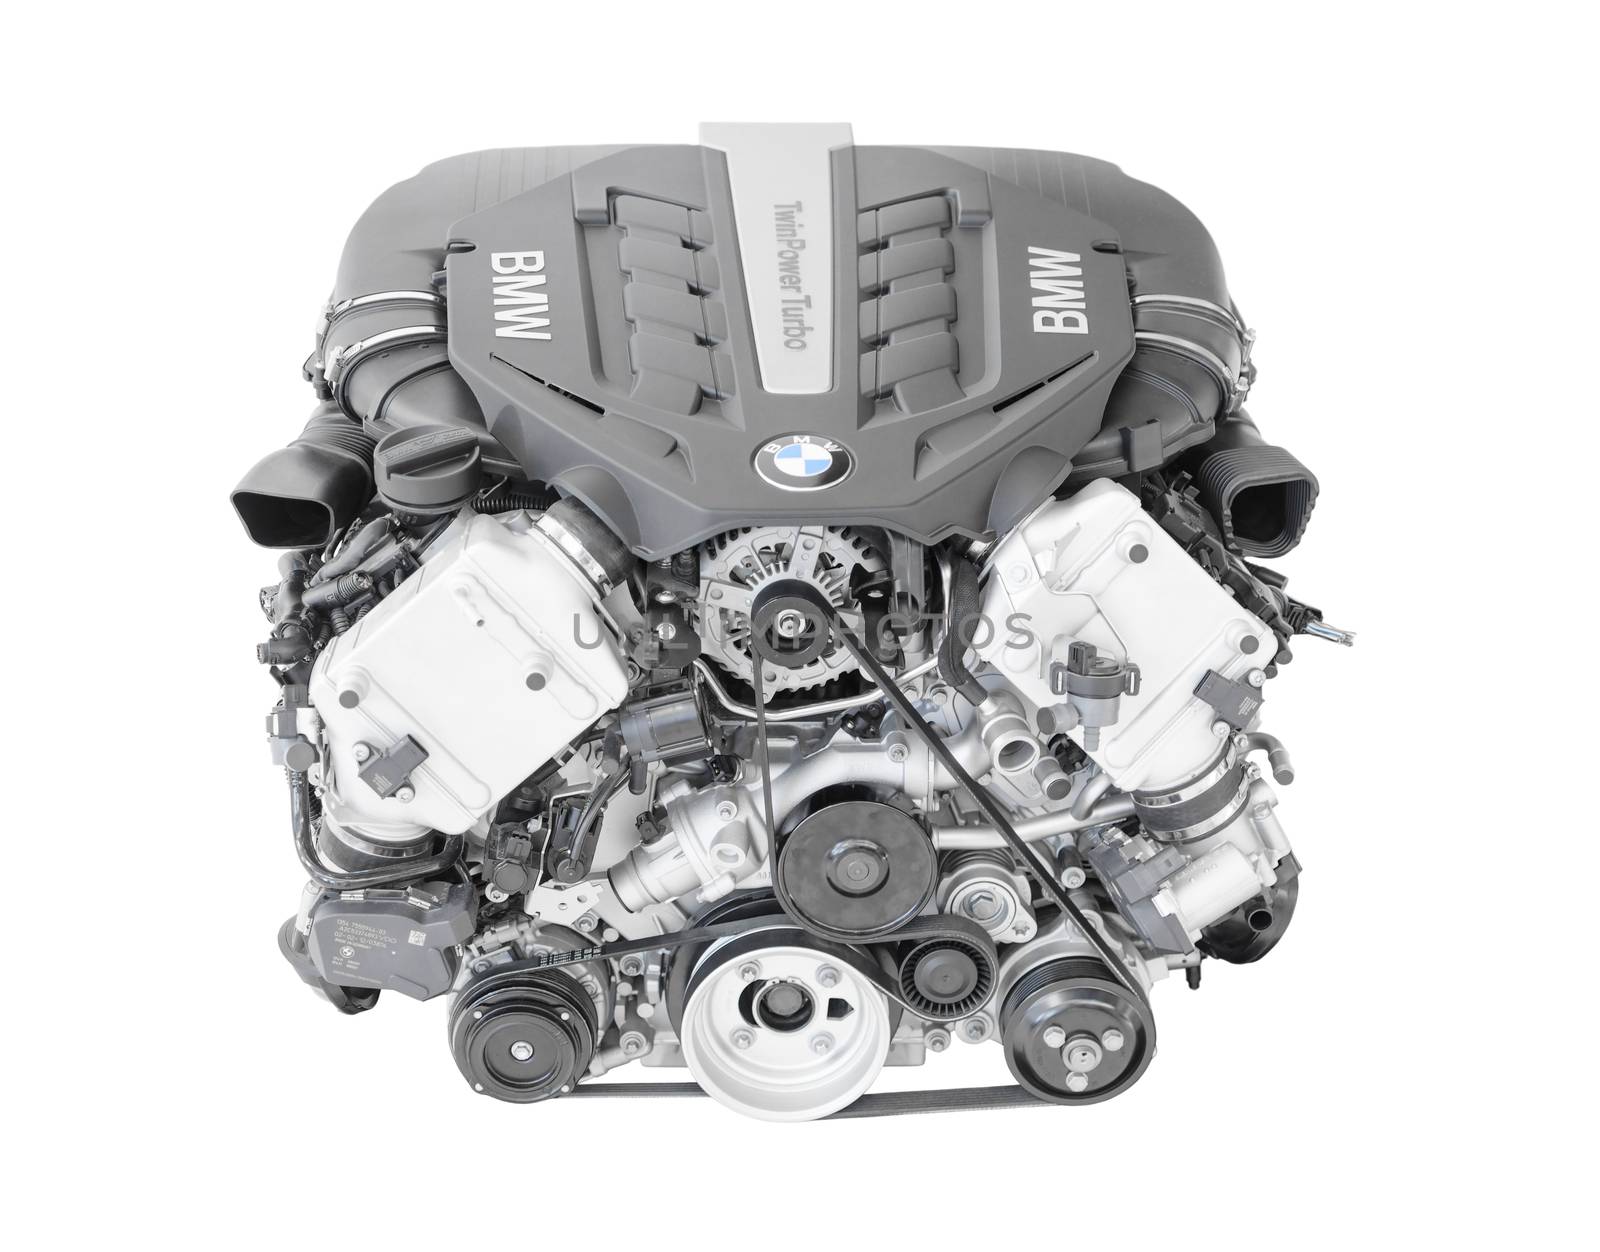 Munich, Germany - September 28, 2014: New modern flagship top model of irresistibly dynamic and incredibly efficient car engine. BMW TwinPower turbo V8-cylinder top-of-the-range petrol engine isolated on white.